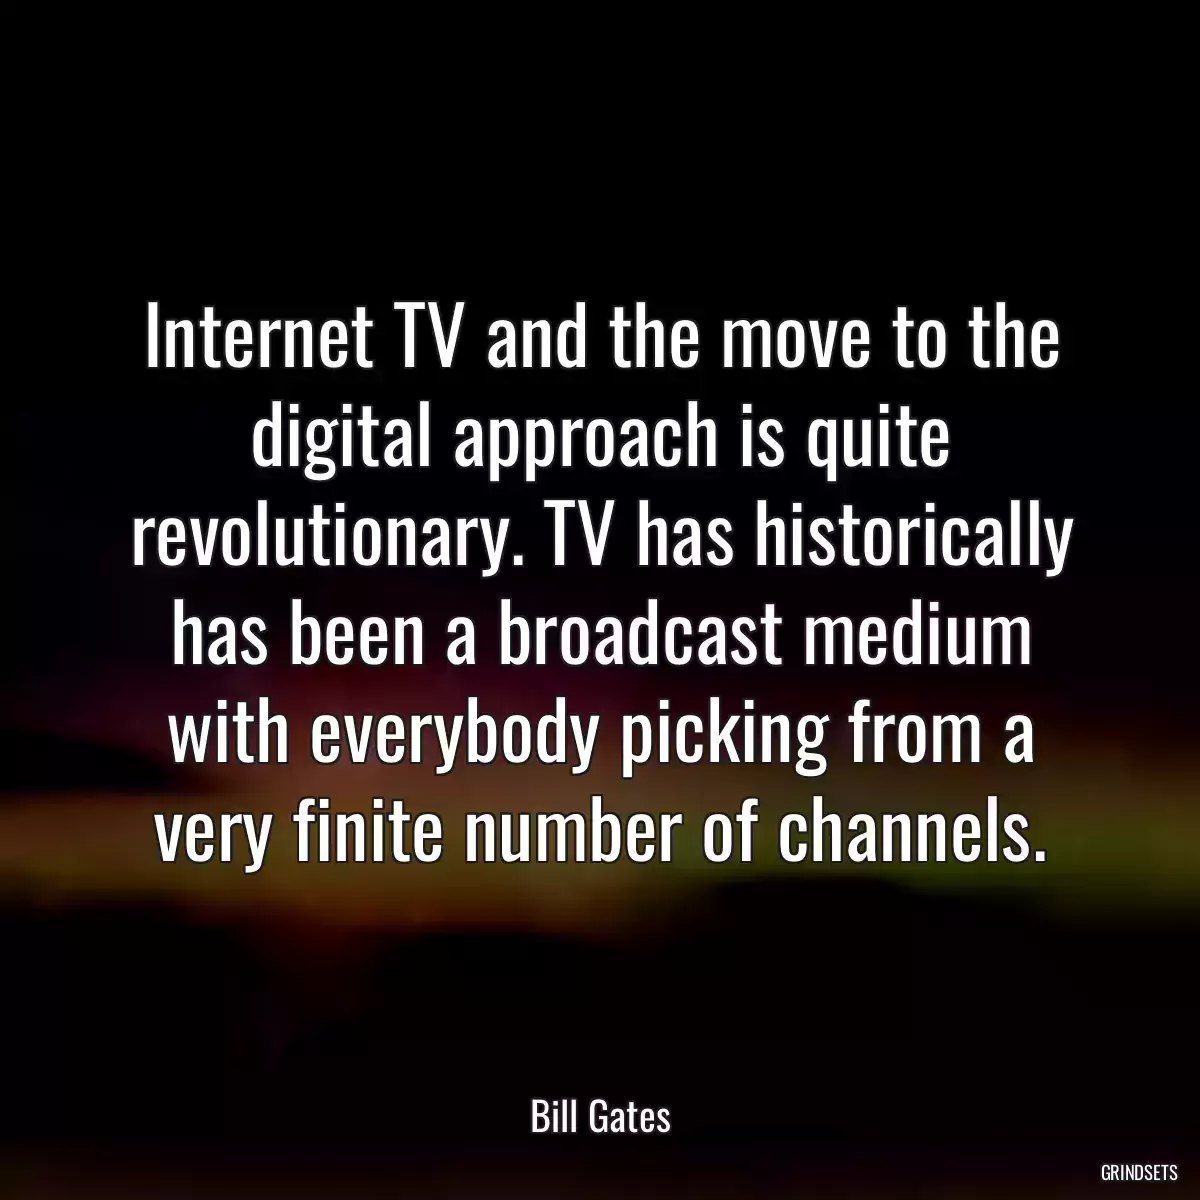 Internet TV and the move to the digital approach is quite revolutionary. TV has historically has been a broadcast medium with everybody picking from a very finite number of channels.